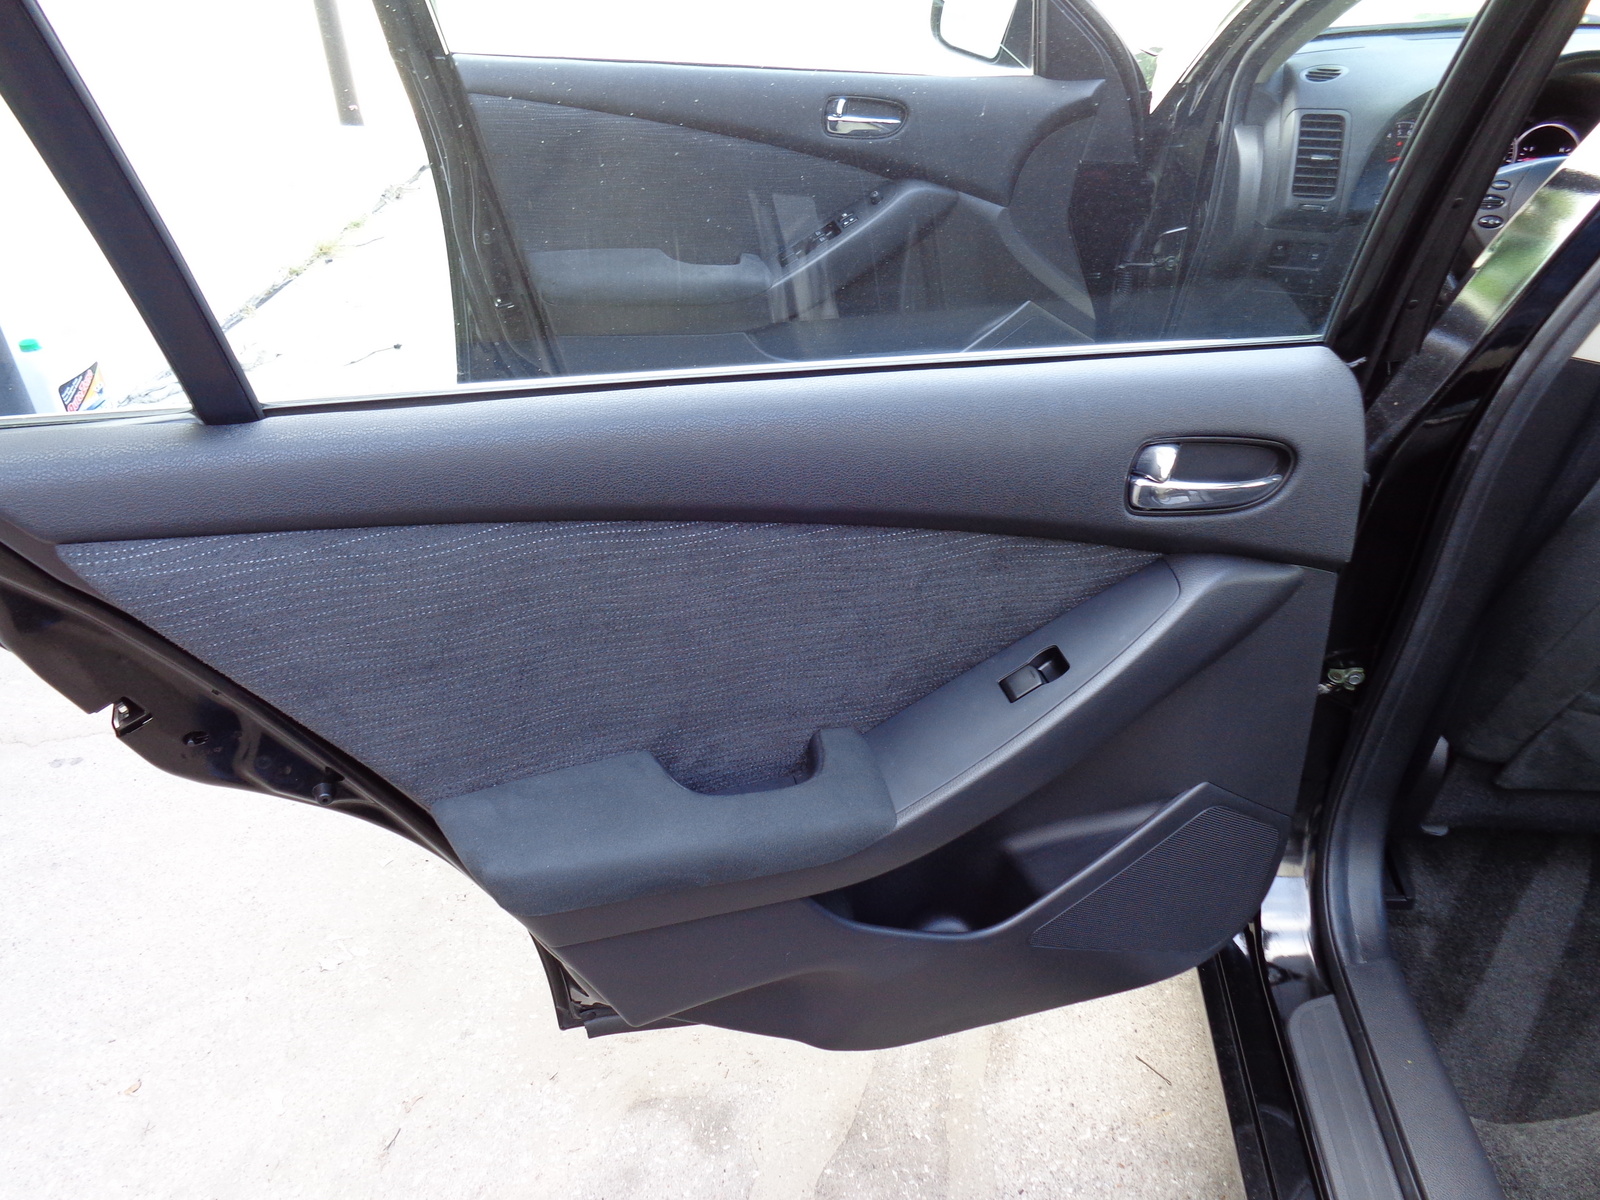 2010 Nissan altima trim packages #5